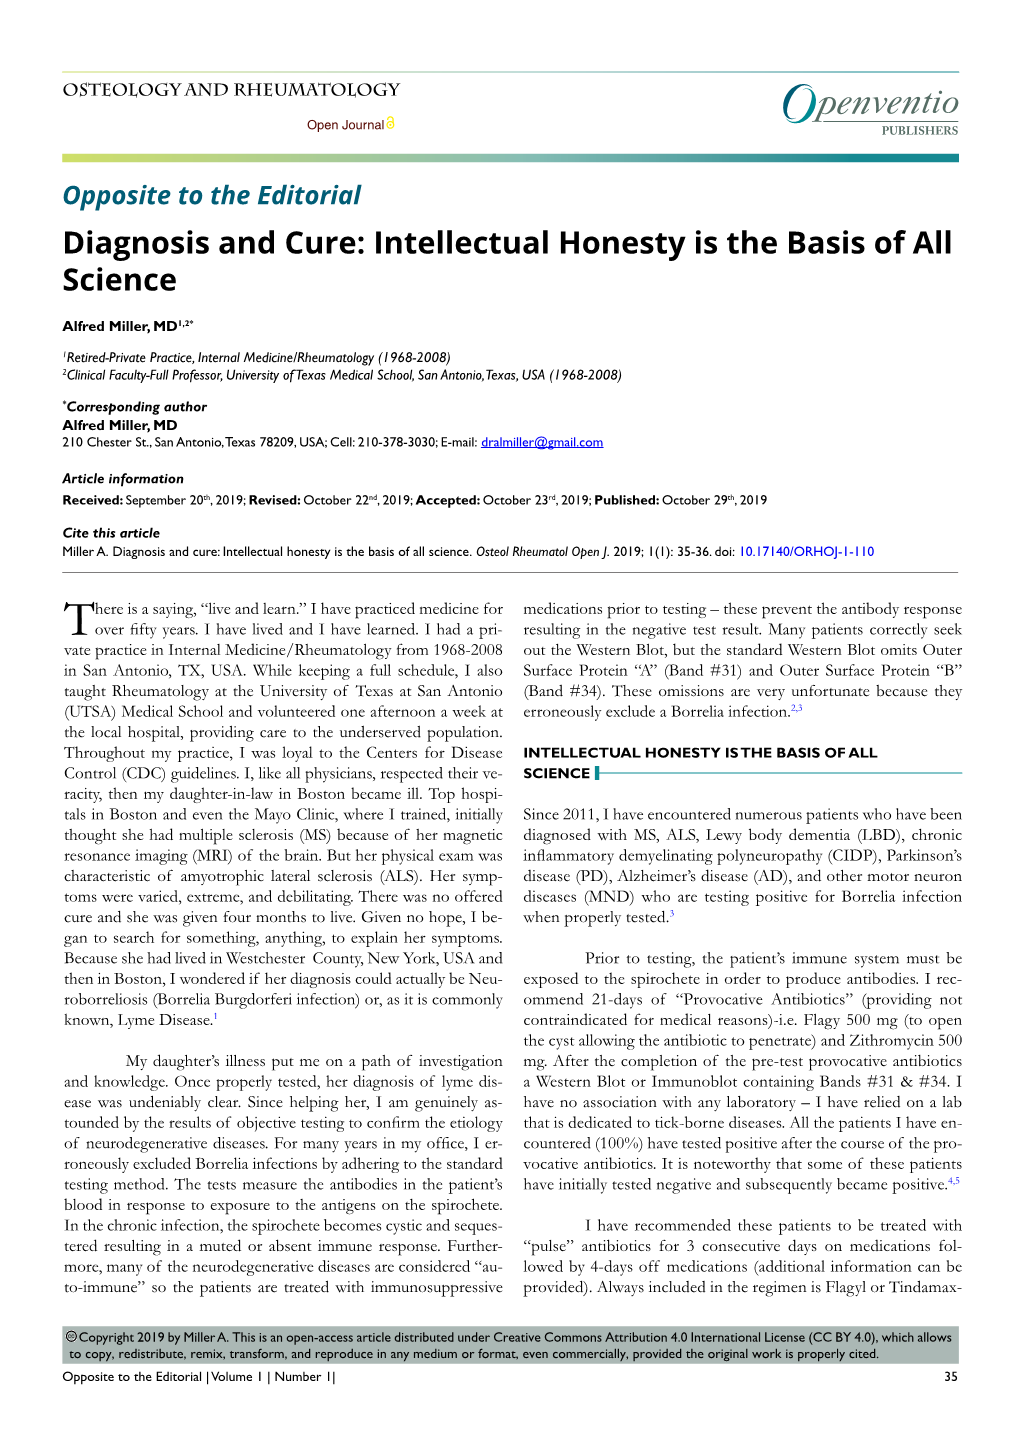 Diagnosis and Cure: Intellectual Honesty Is the Basis of All Science